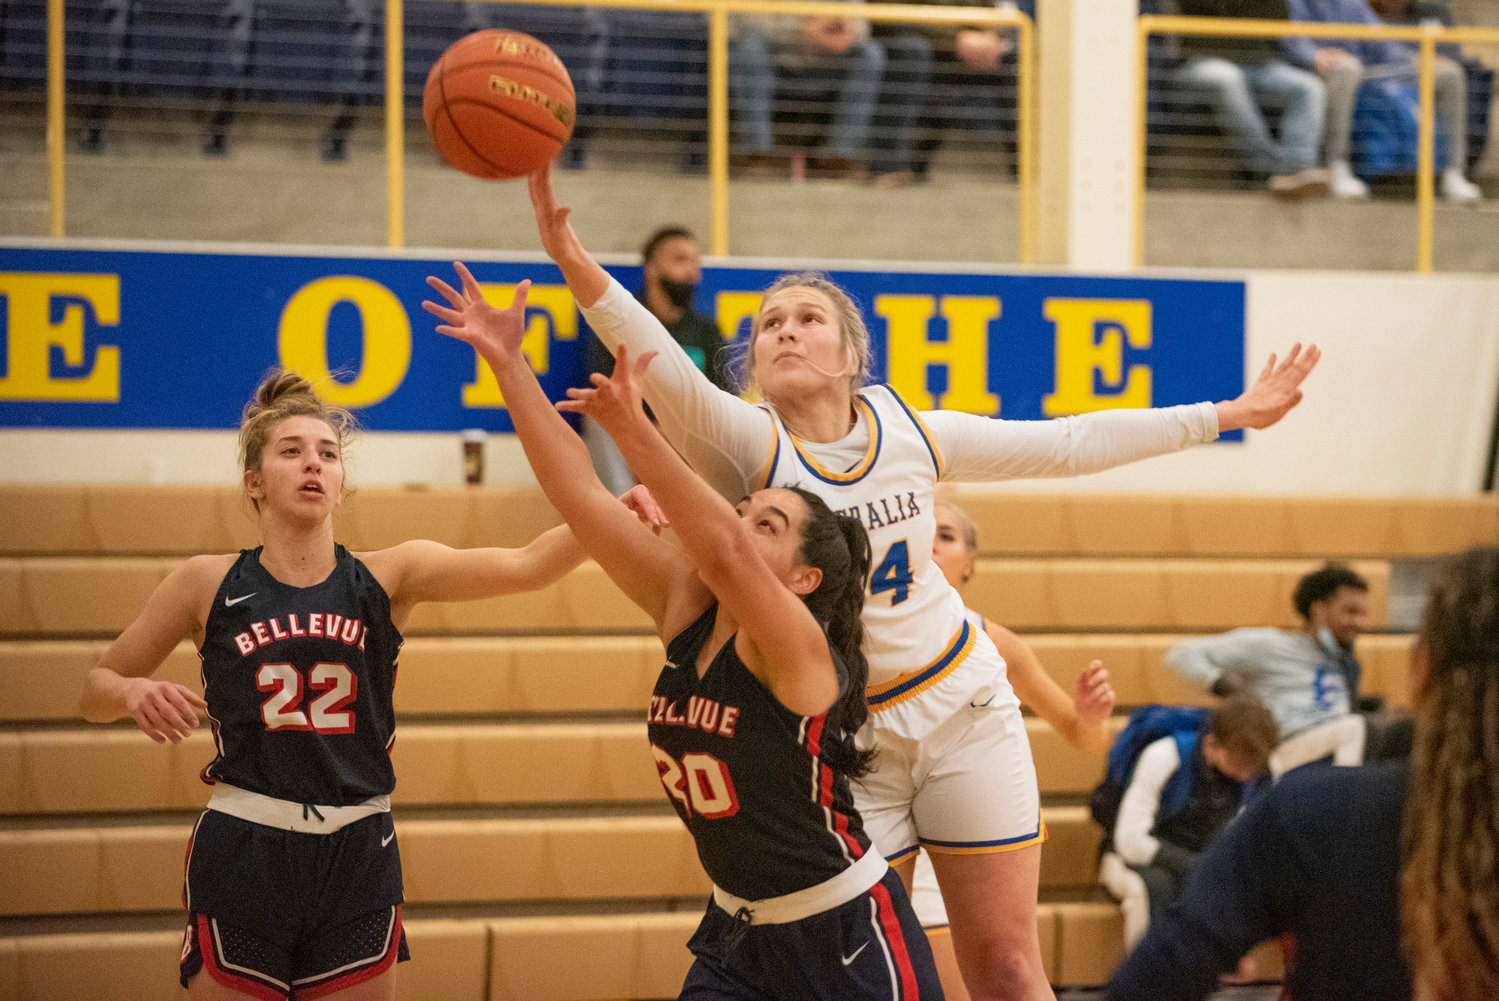 Centralia College's Paige Winter (24) goes for an offensive rebound against Bellevue on Dec. 1.